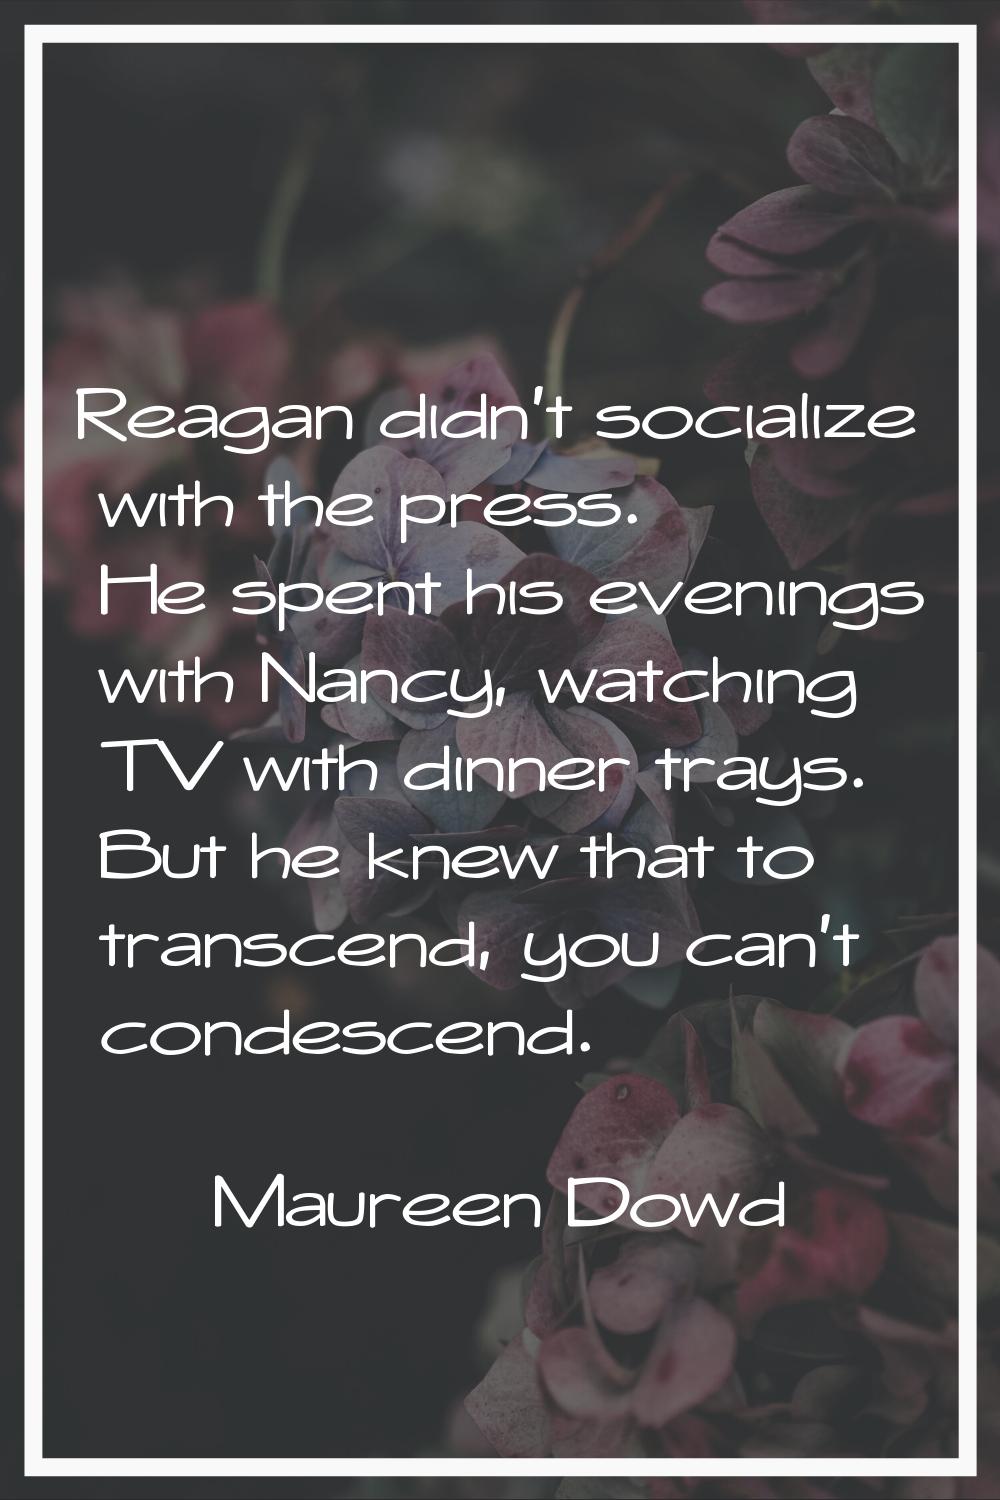 Reagan didn't socialize with the press. He spent his evenings with Nancy, watching TV with dinner t